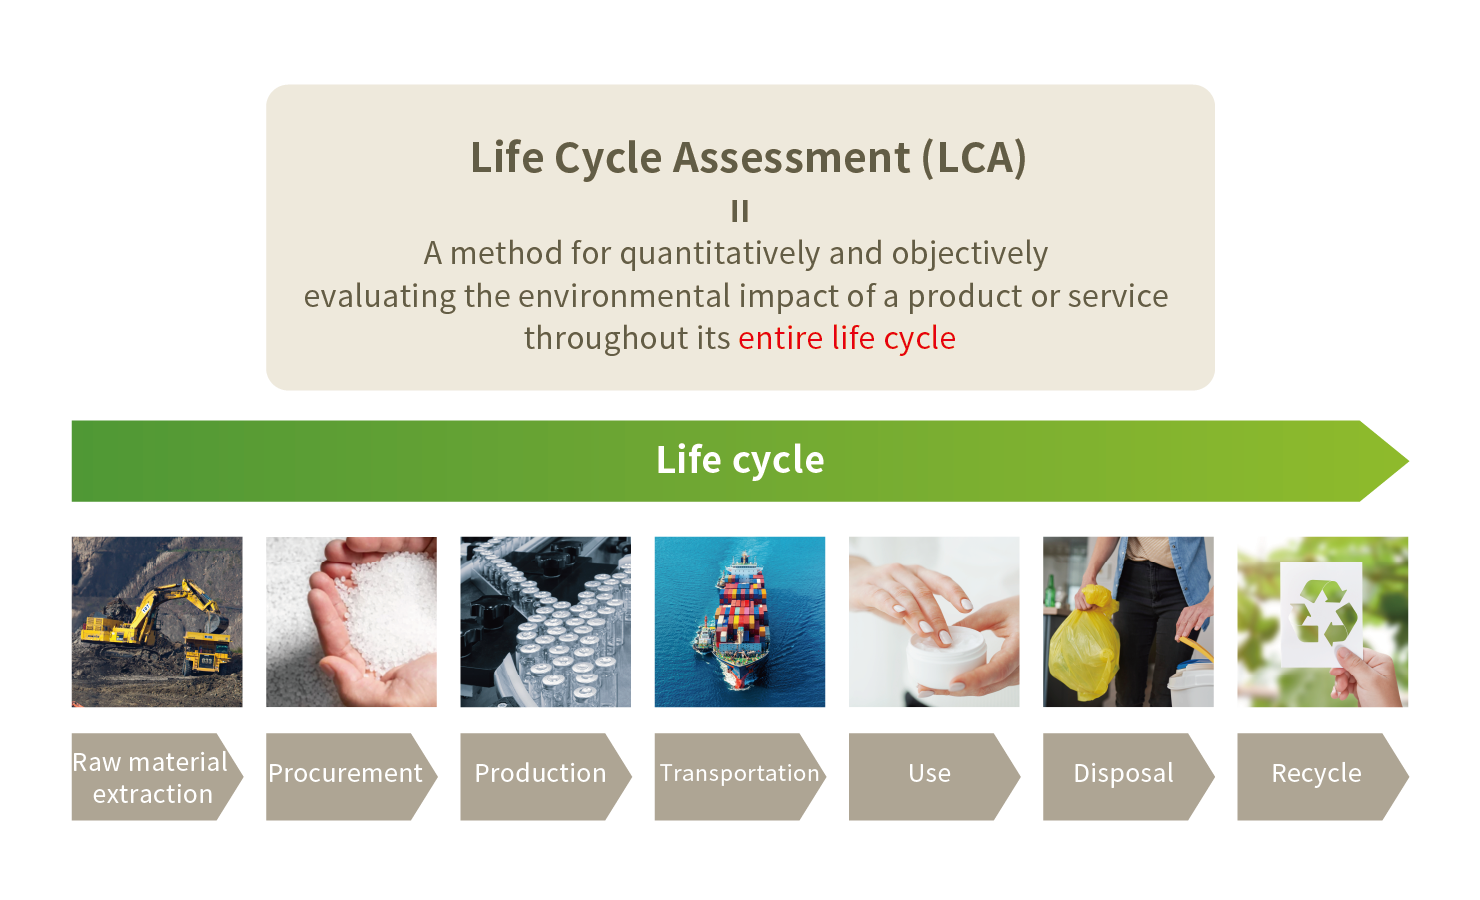 What is Life Cycle Assessment (LCA)?